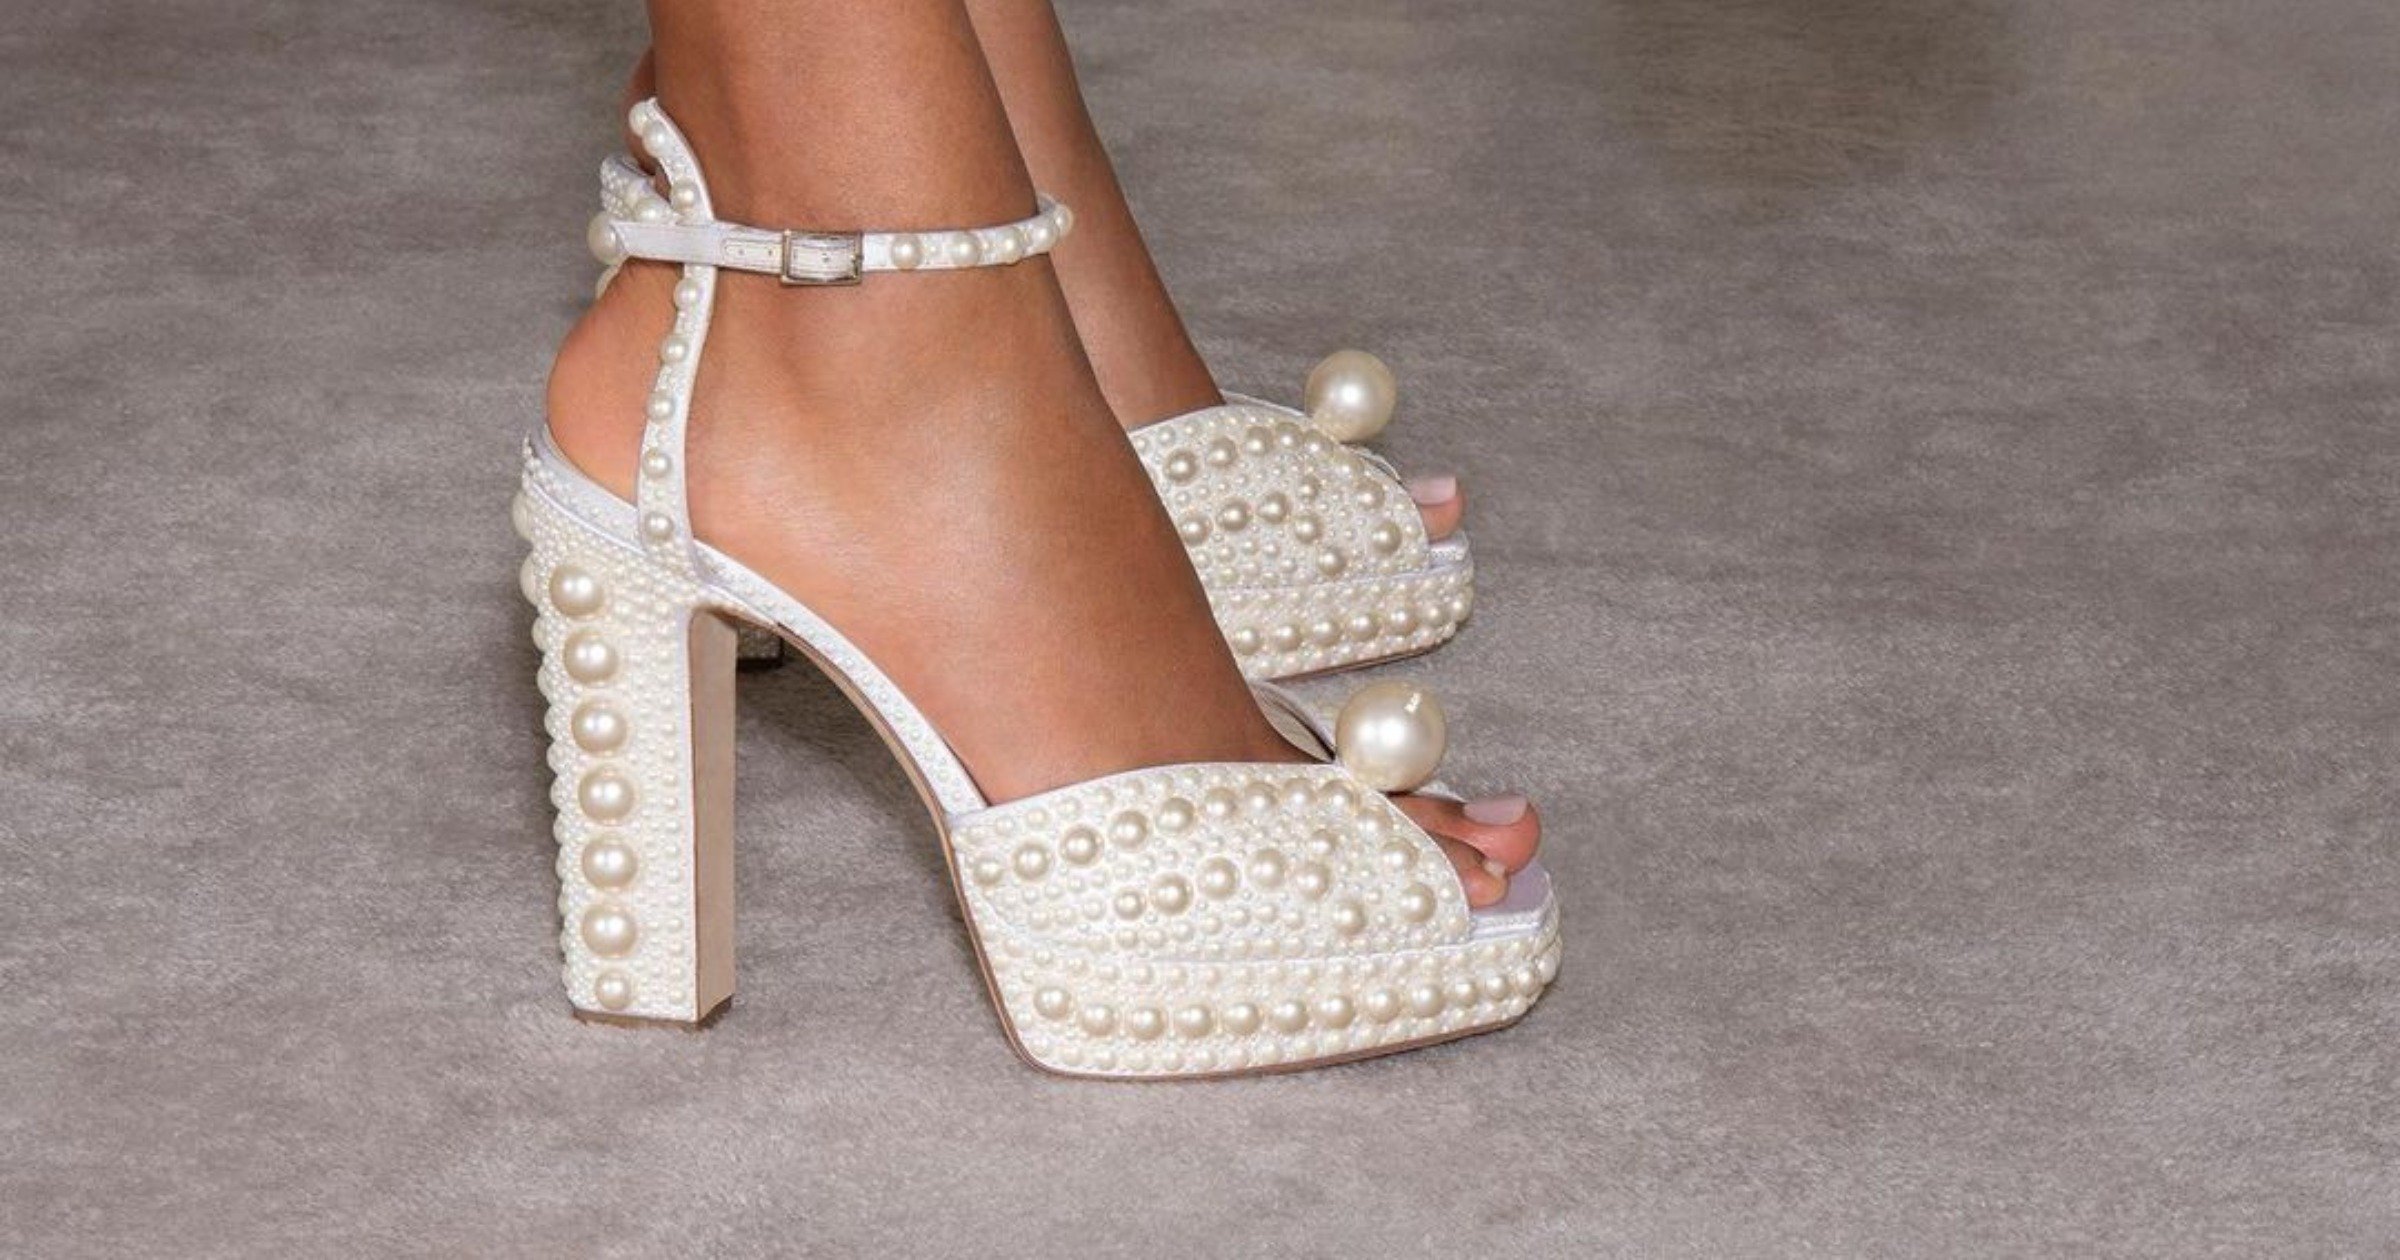 The Best Pearl Wedding Shoes to Complete Your Big Day Look